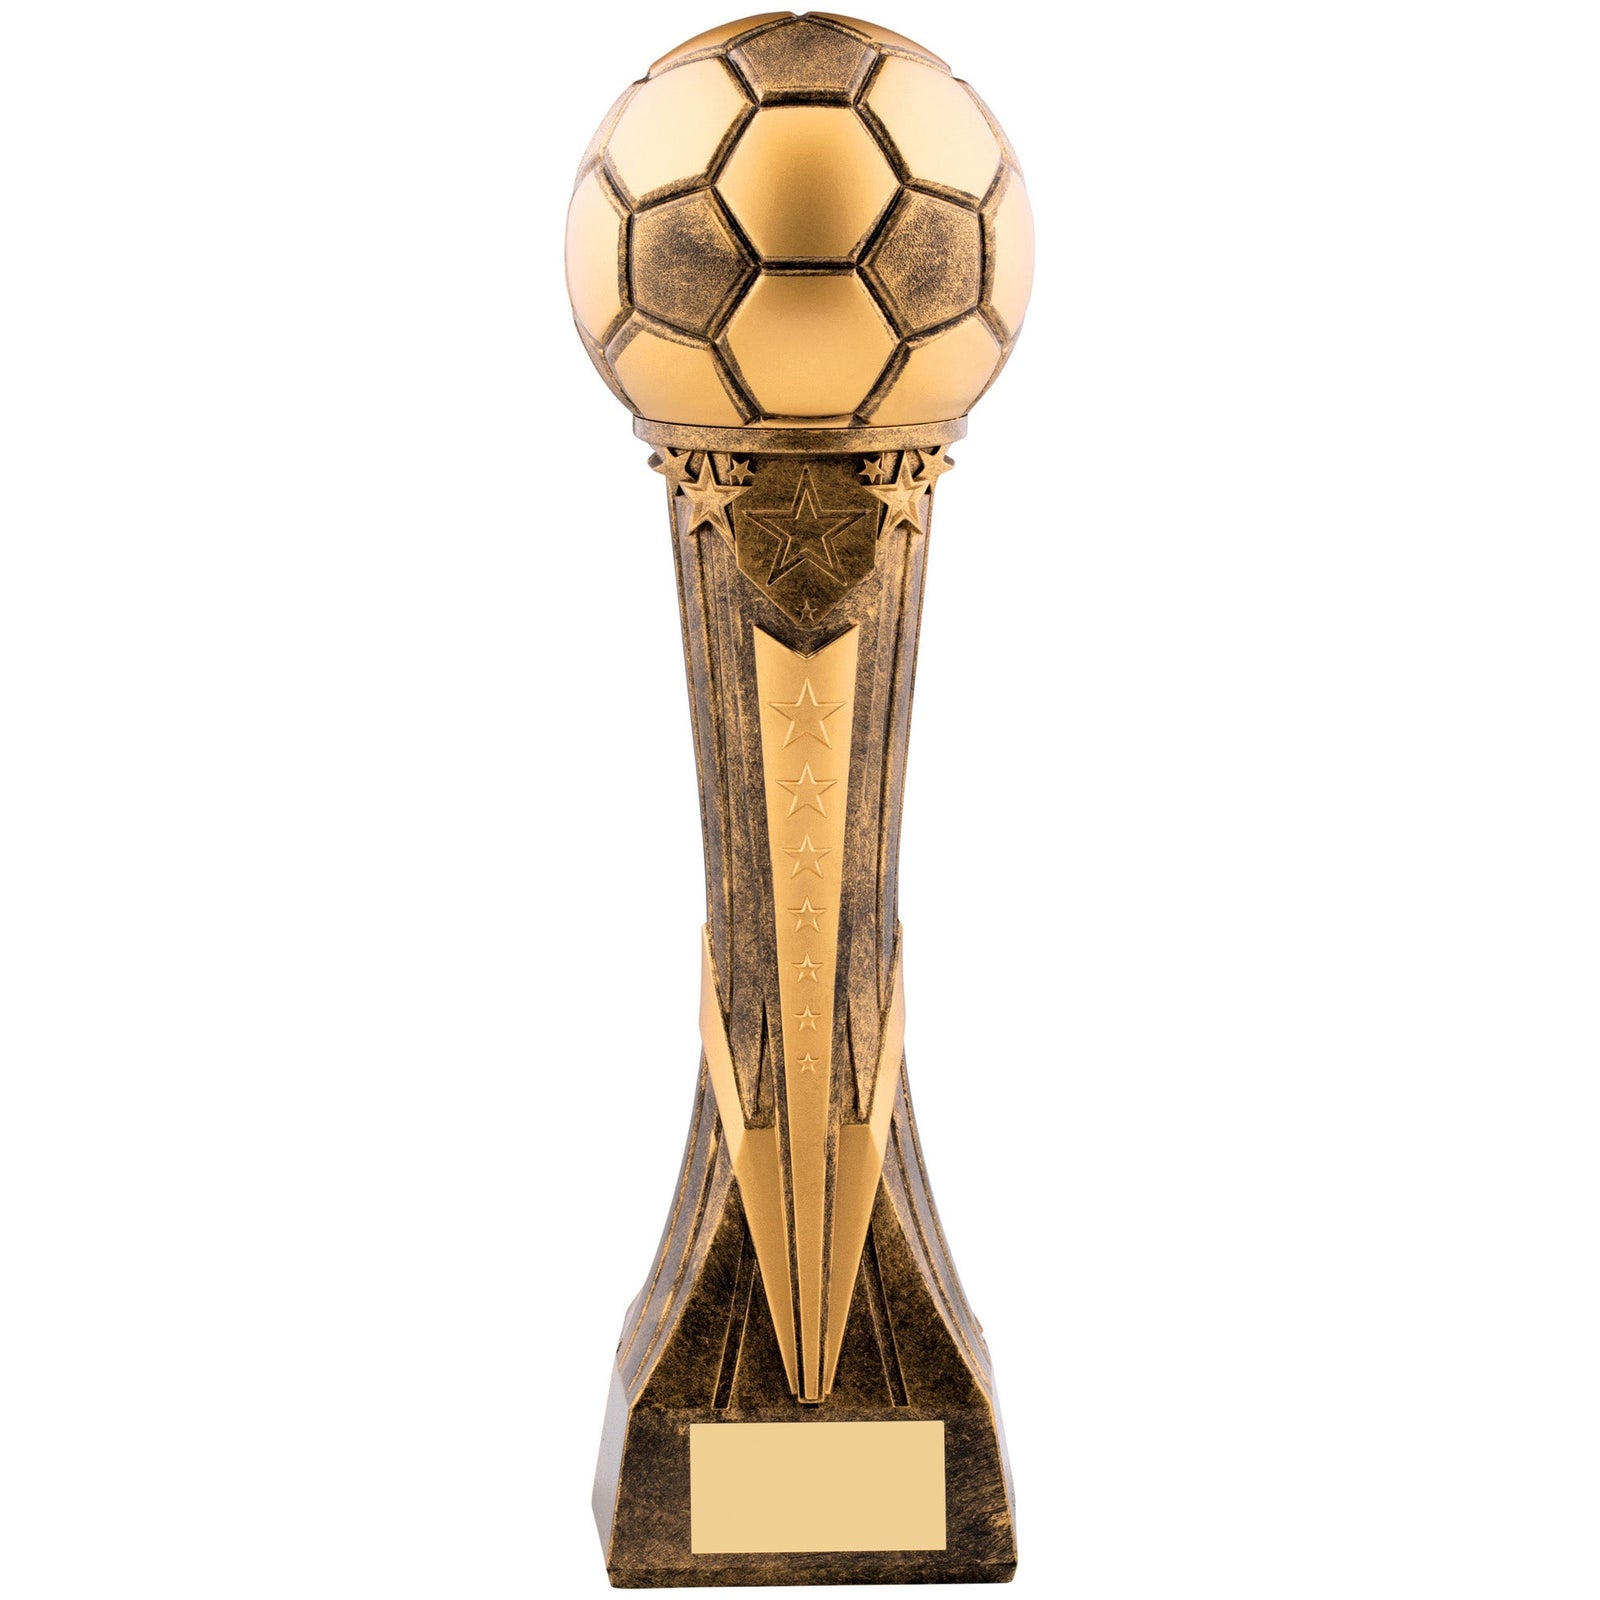 Cosmos Football Trophy (Gold Ball Statue)